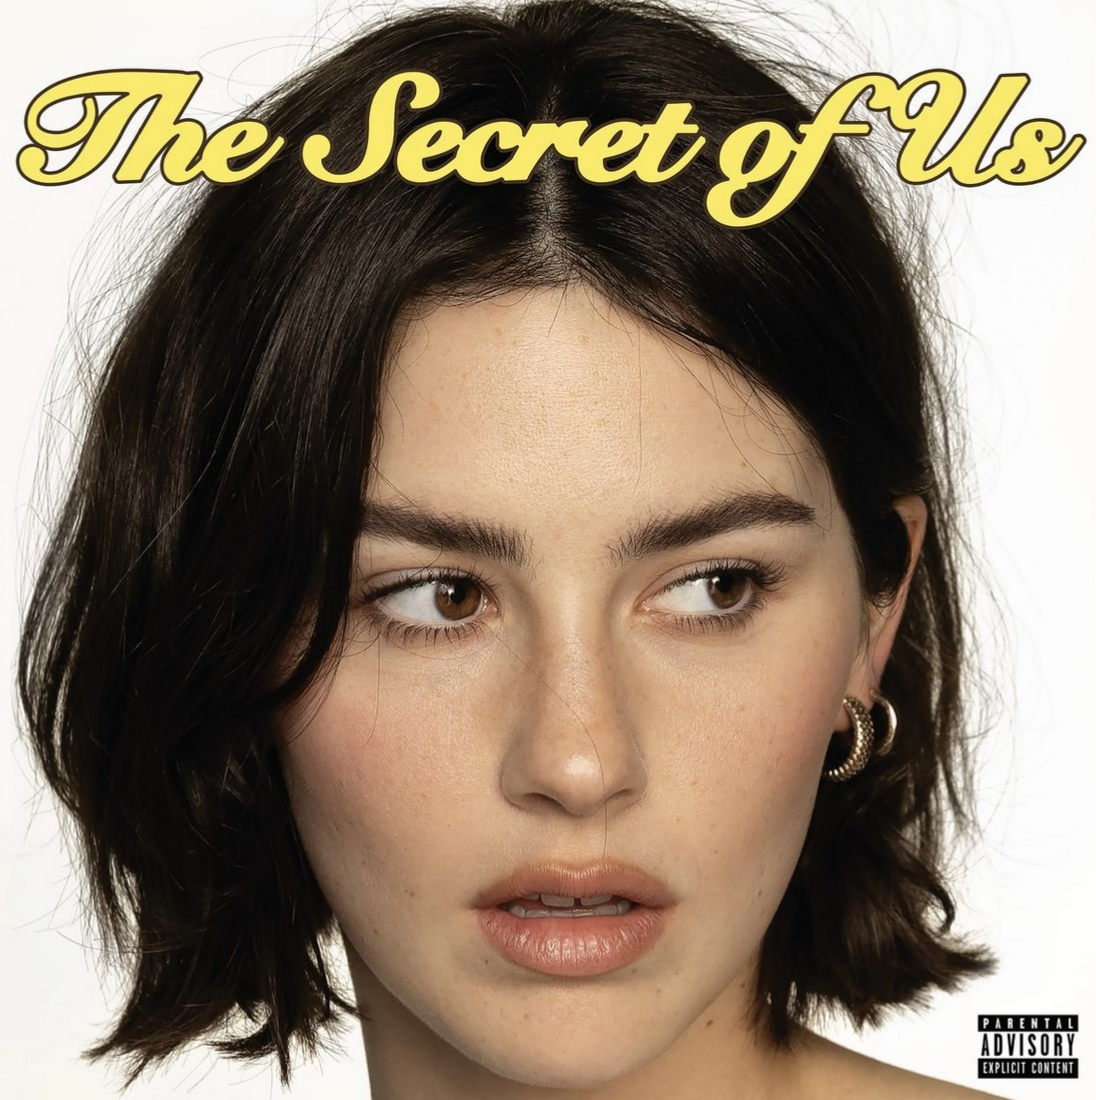 Album cover for The Secret of Us, showing a headshot of Gracie Abrams looking to the side in thought